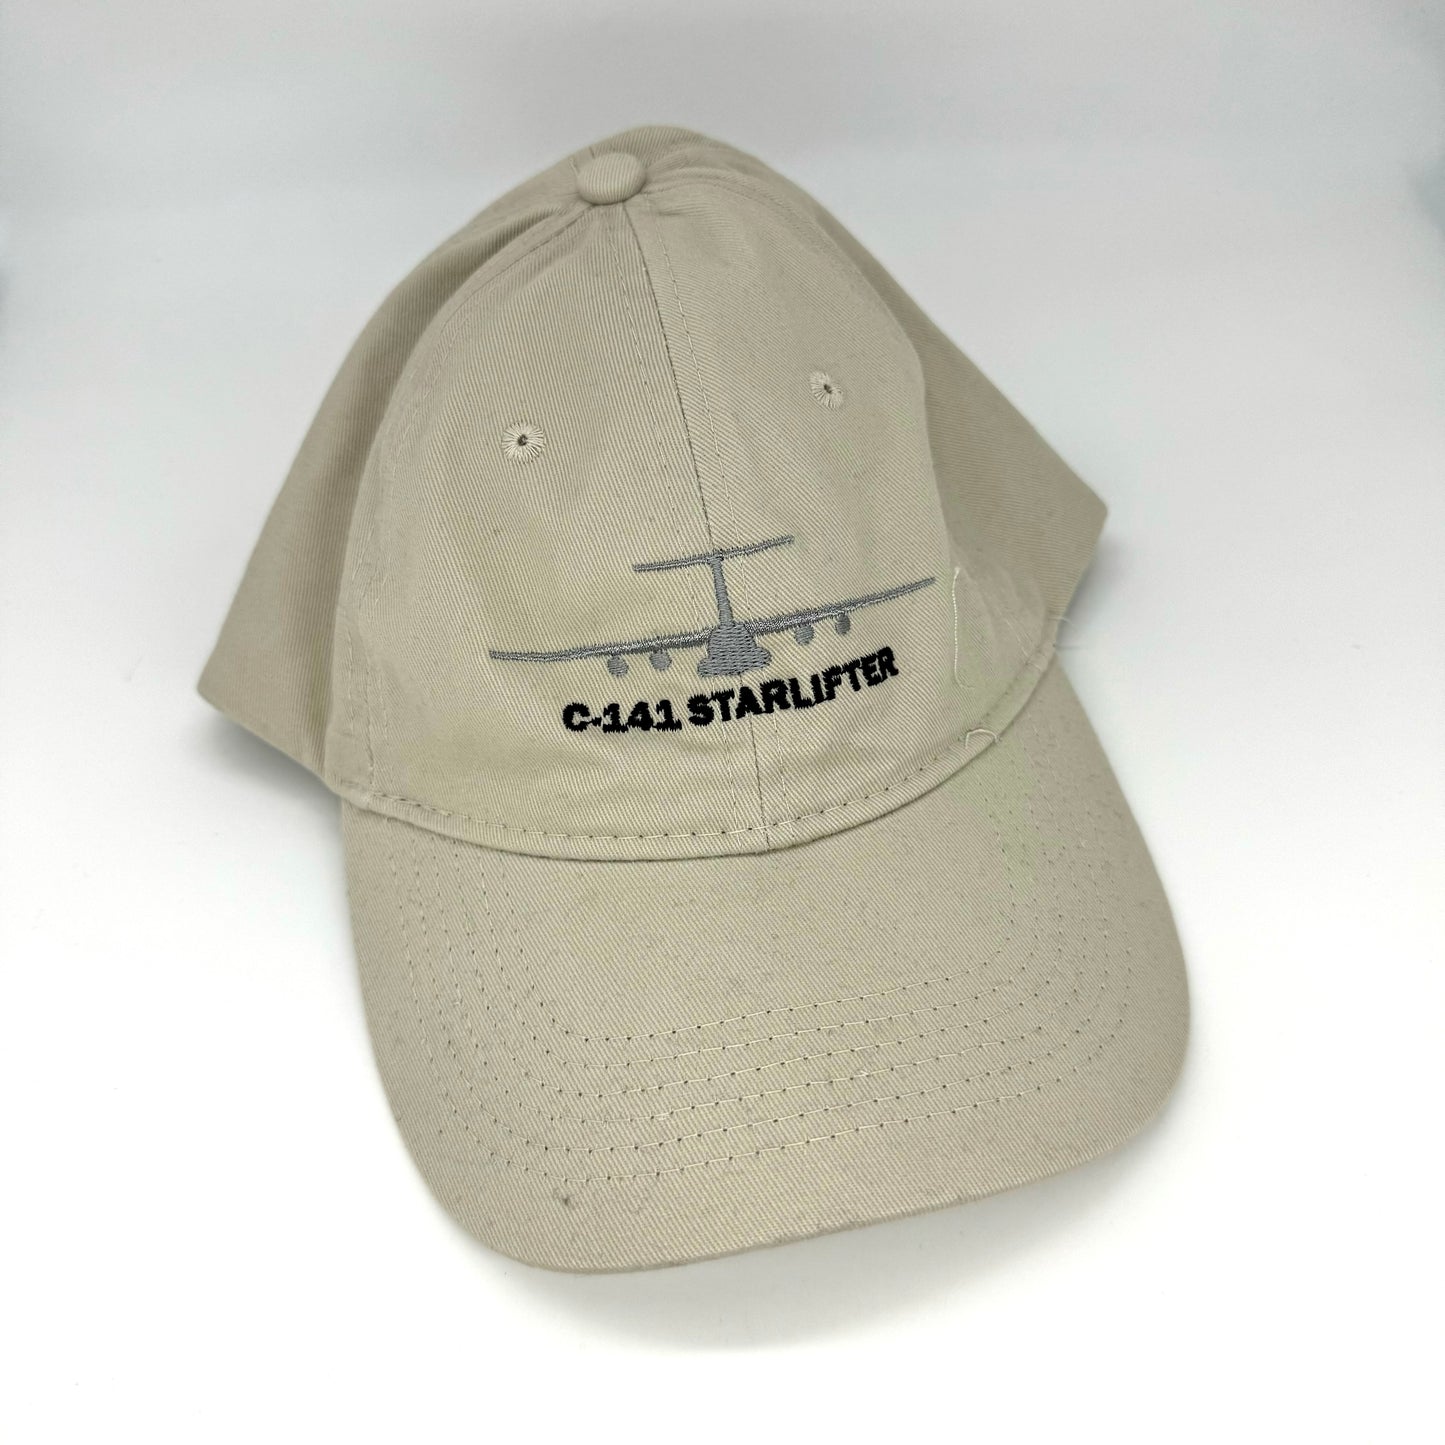 C-141 Starlifter Cap - Hat Embroidered Unstructured Twill